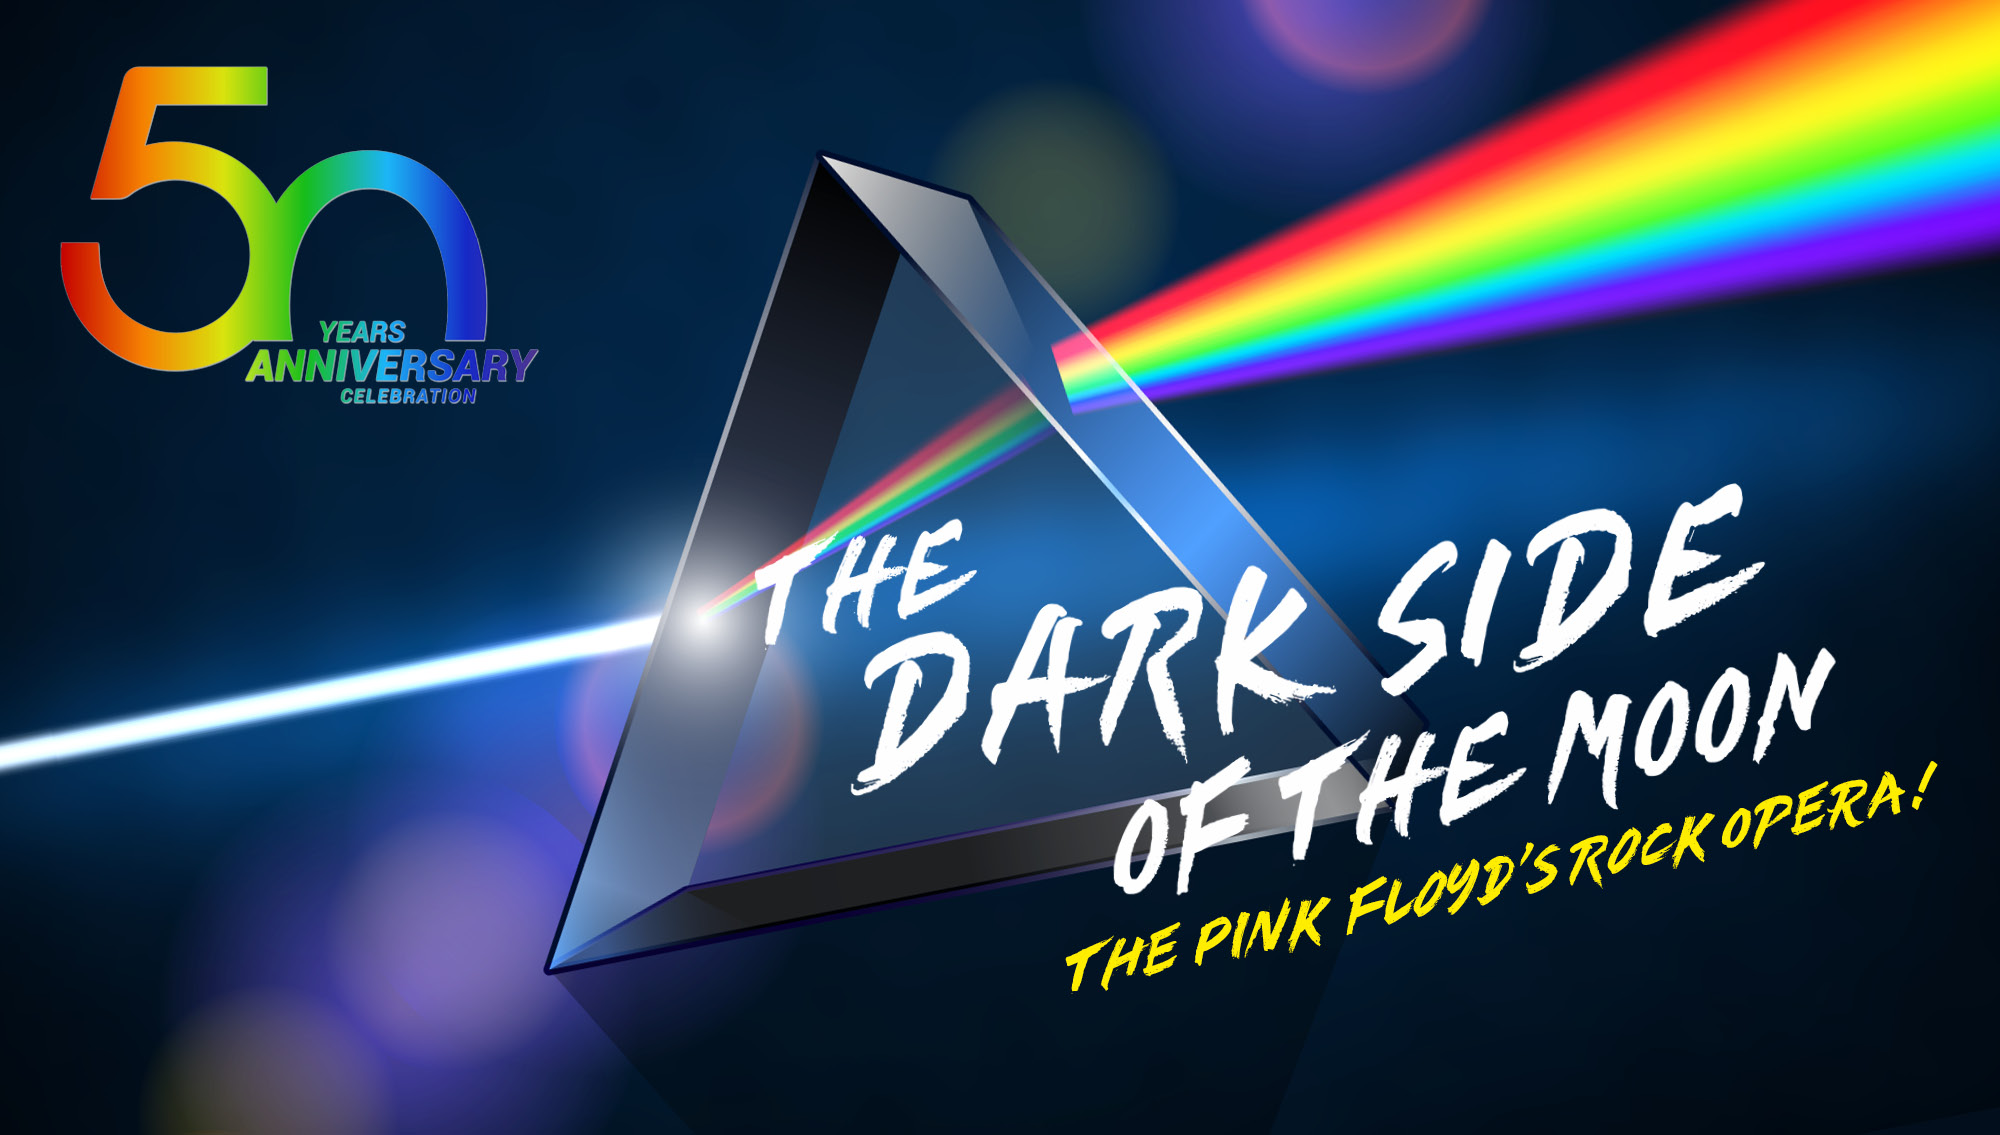 The Dark side of the moon - concert